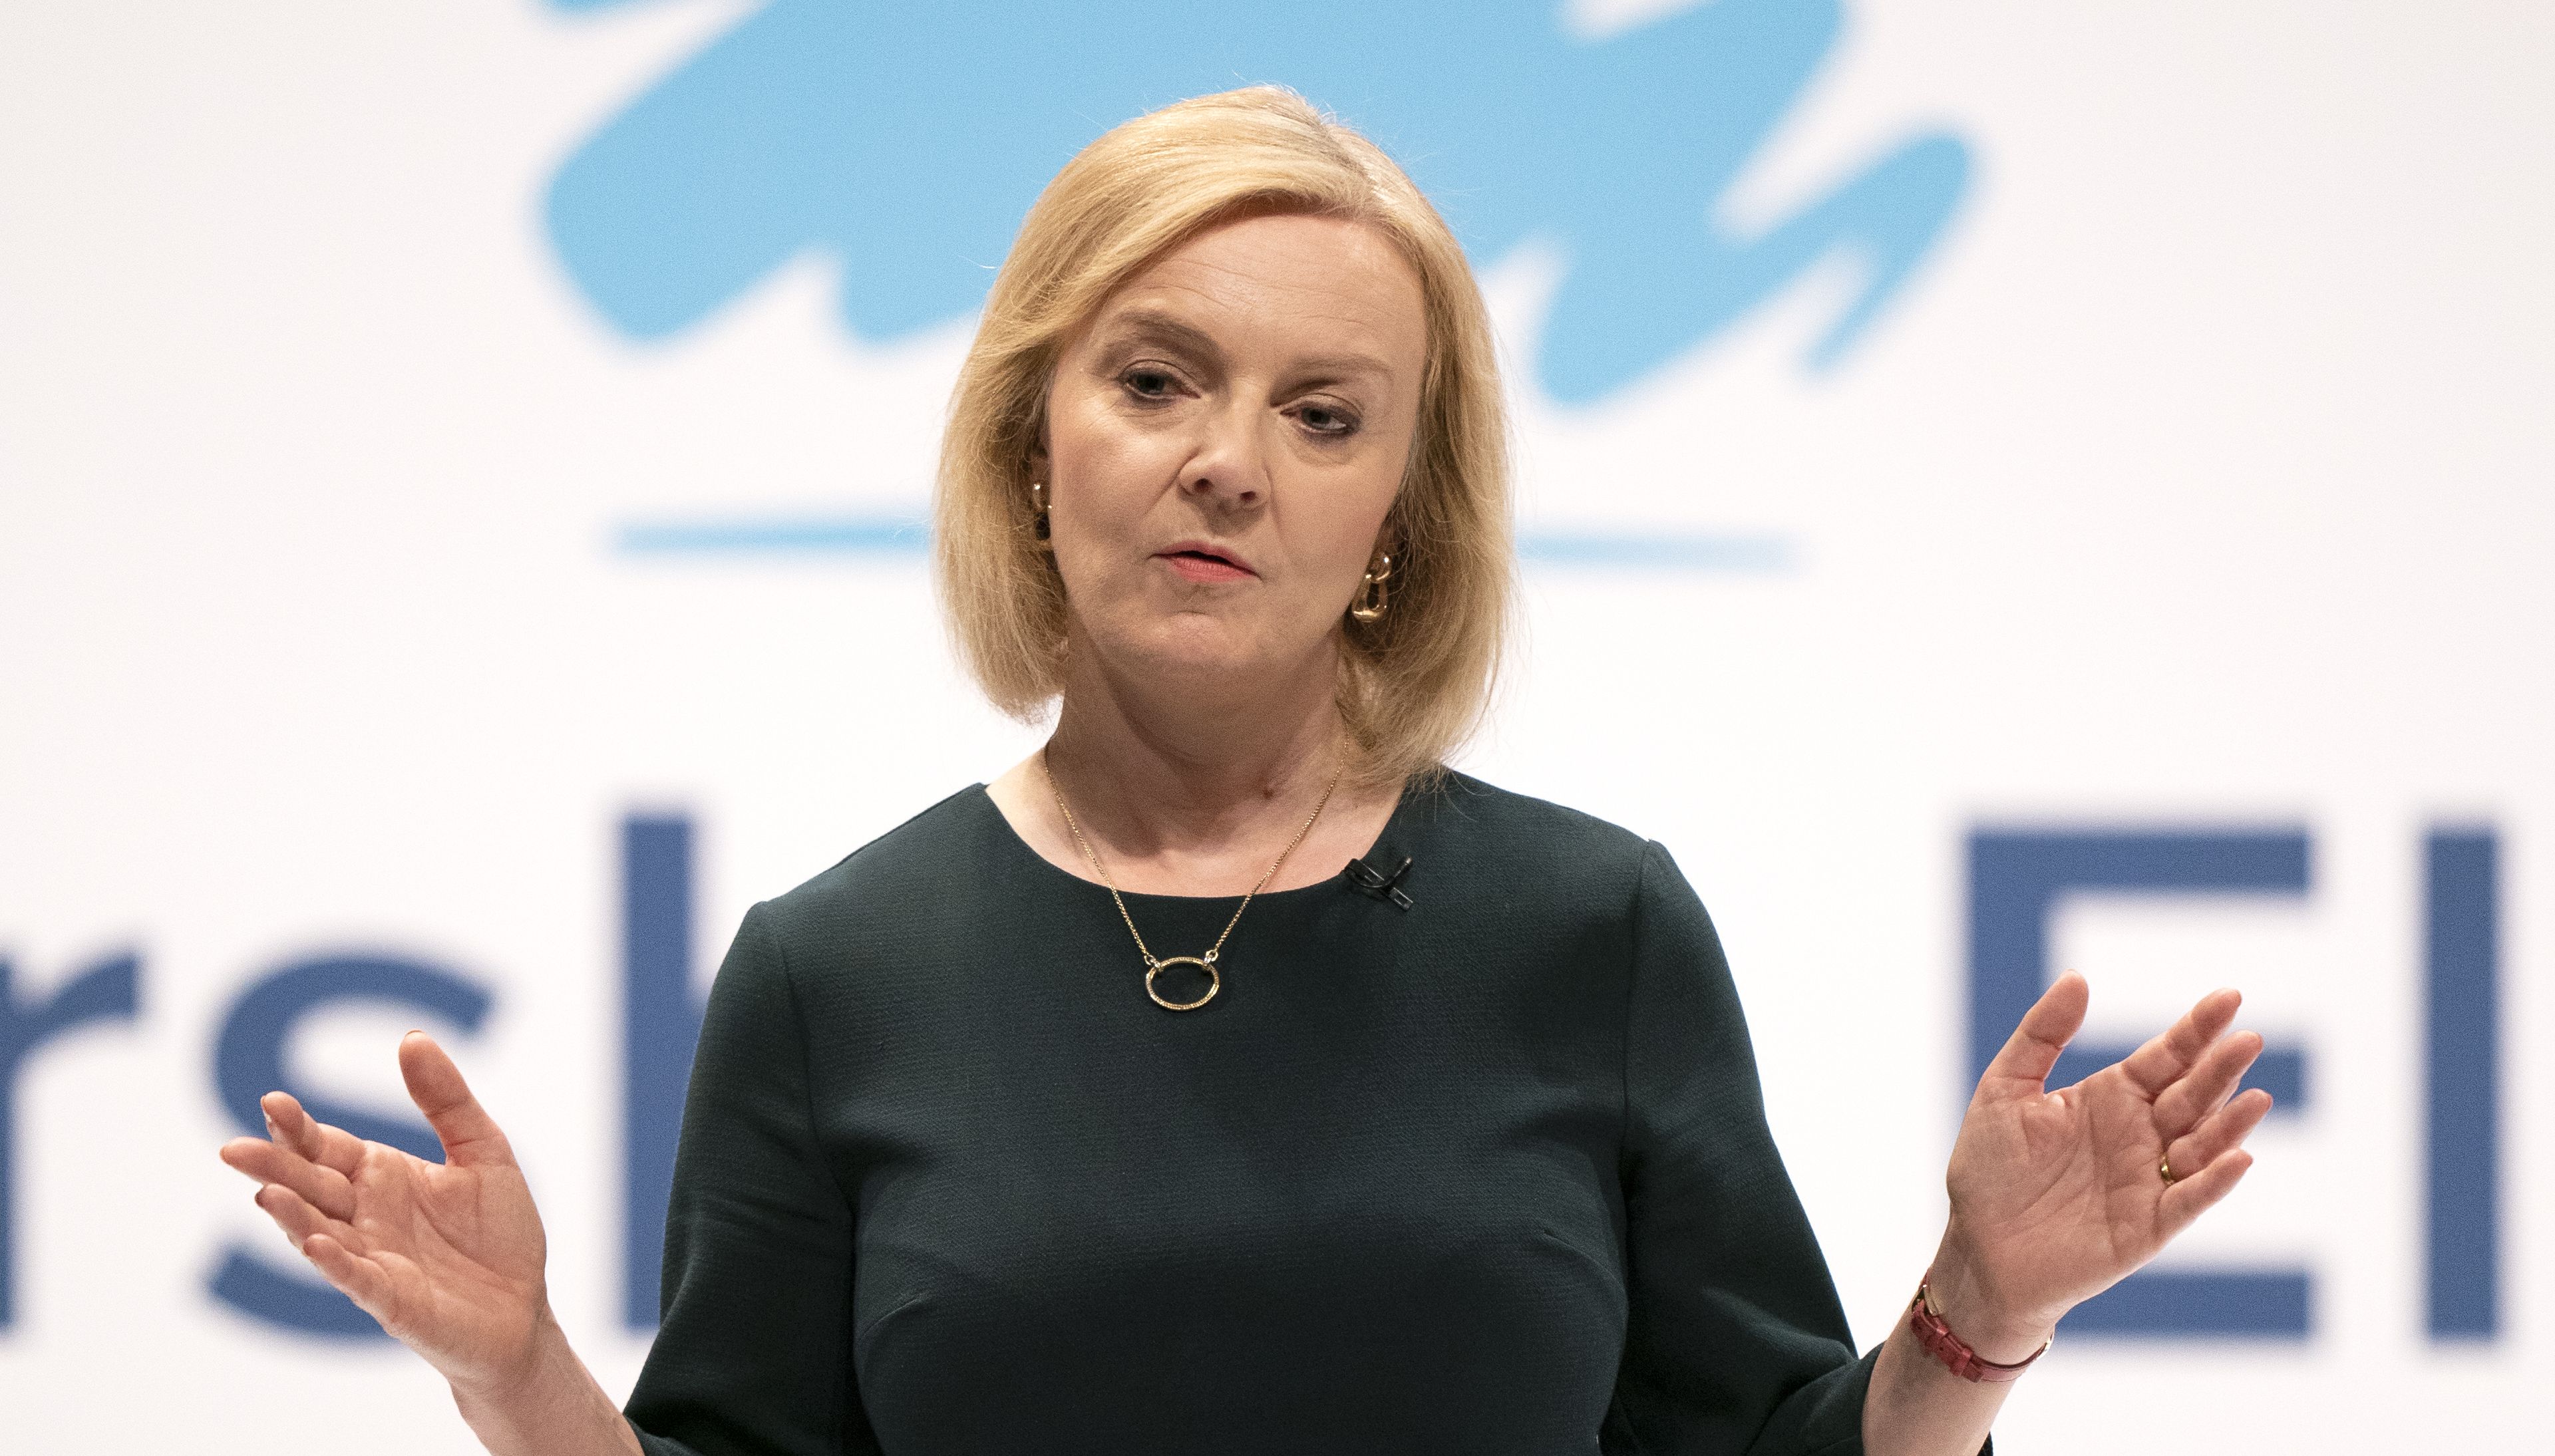 Liz Truss during a hustings event in Perth, Scotland.